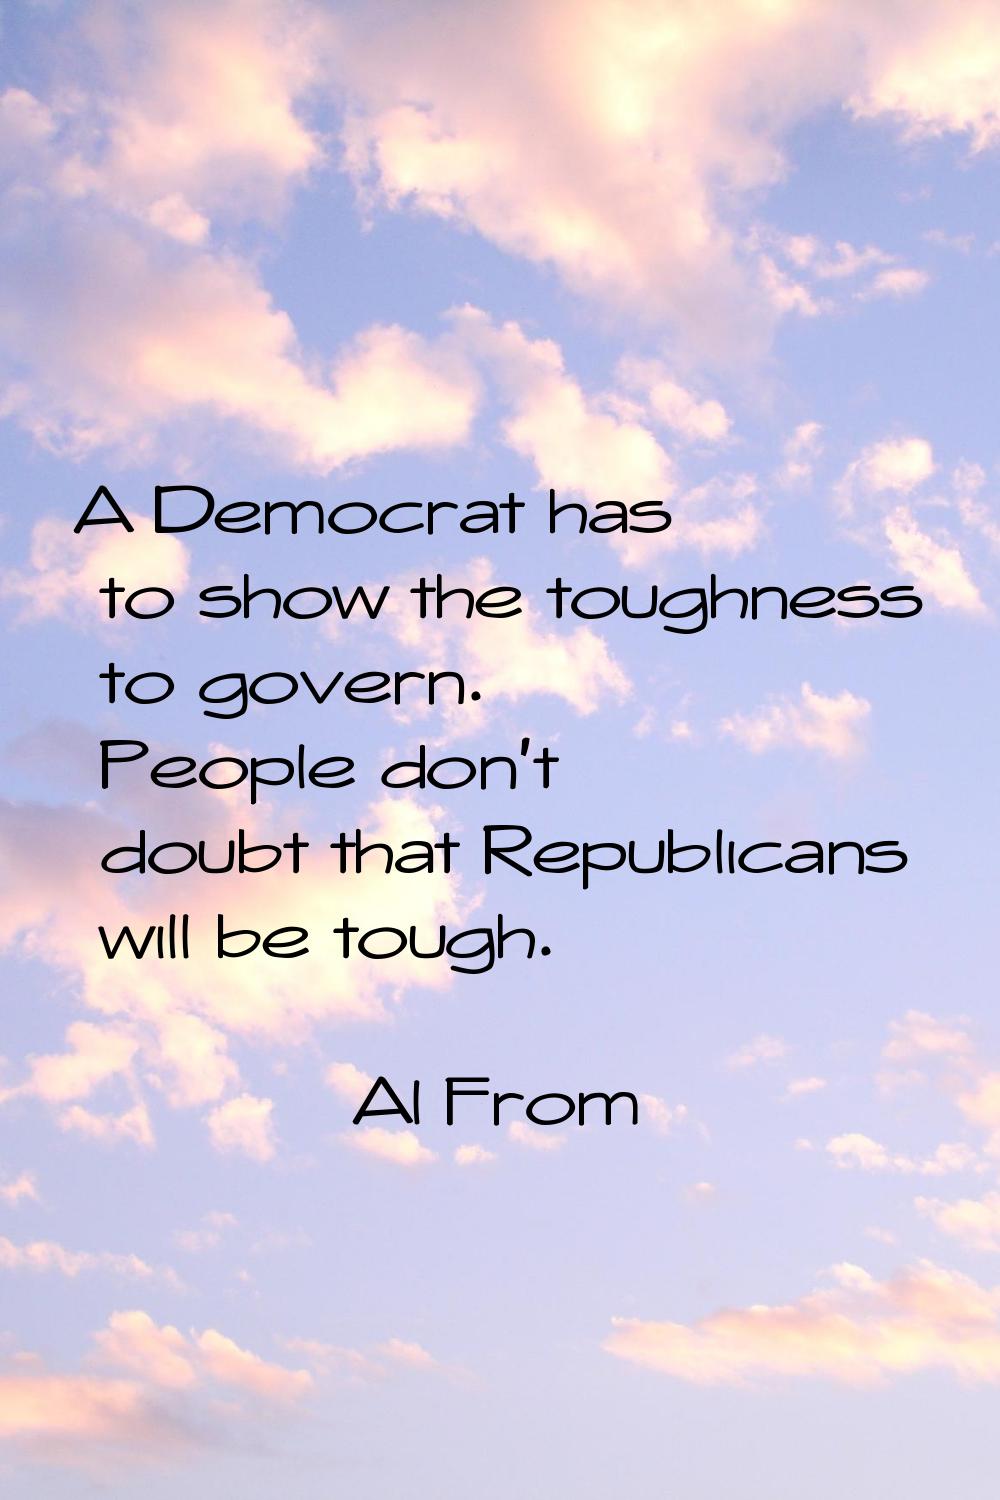 A Democrat has to show the toughness to govern. People don't doubt that Republicans will be tough.